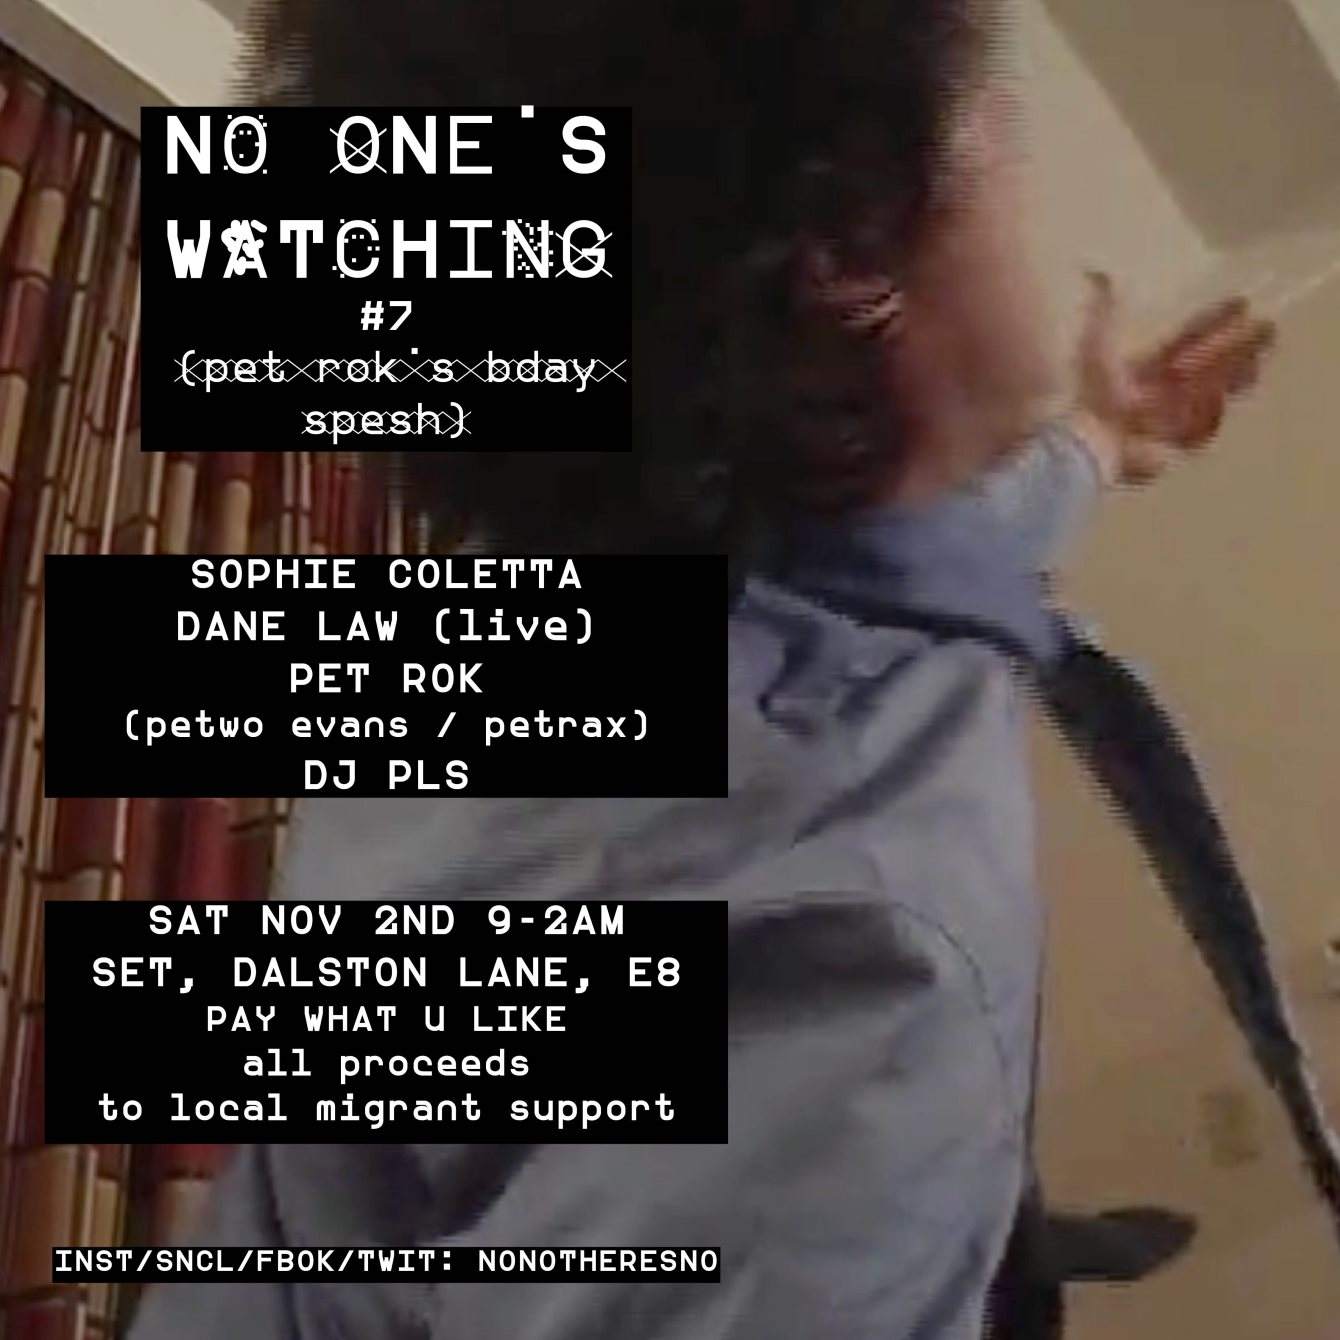 No One's Watching #7 with Sophie Coletta & Dane Law - Flyer front